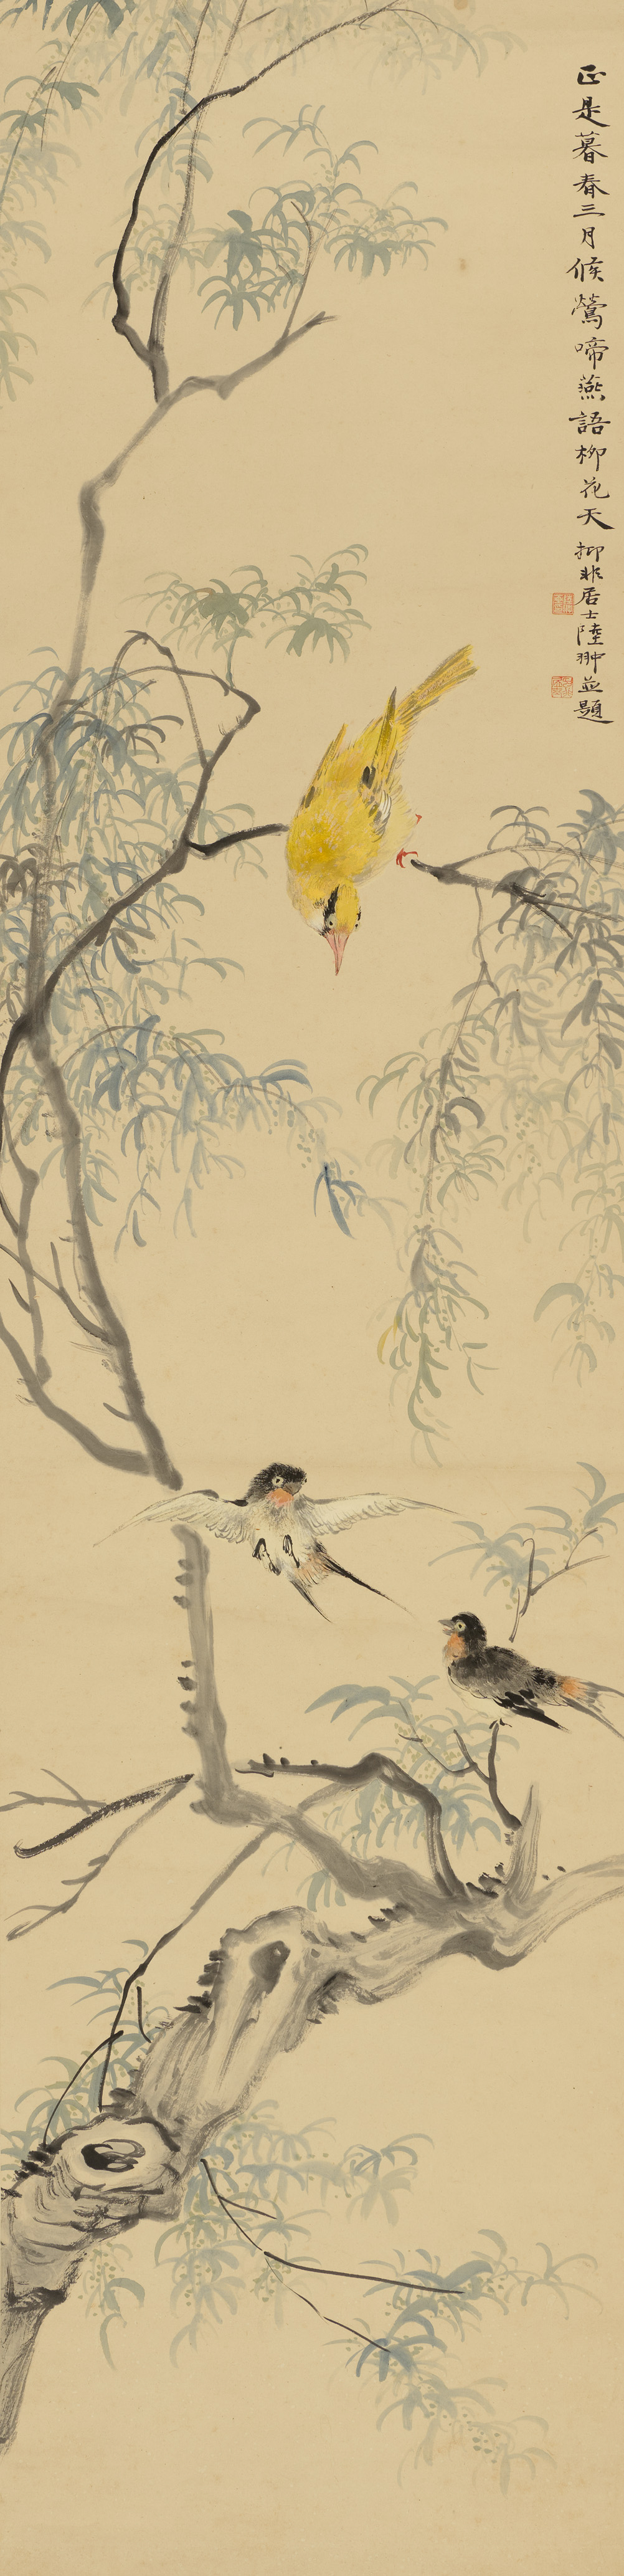 Yifei Lu, in the manner of - Singing oriole and magpies. - image-1